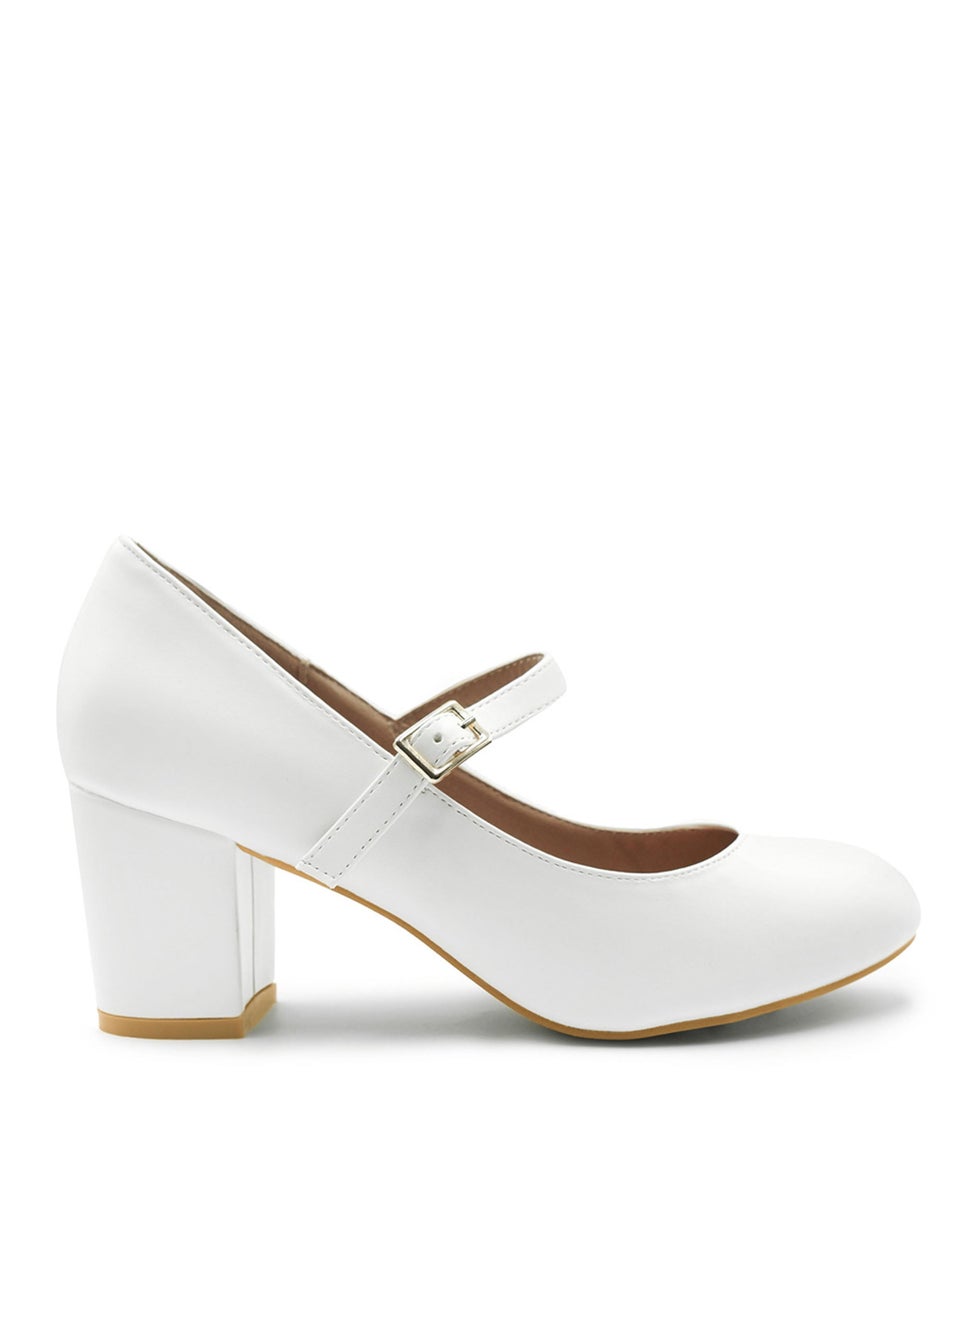 Where's That From Araceli Block Heel Mary Jane Pumps In White